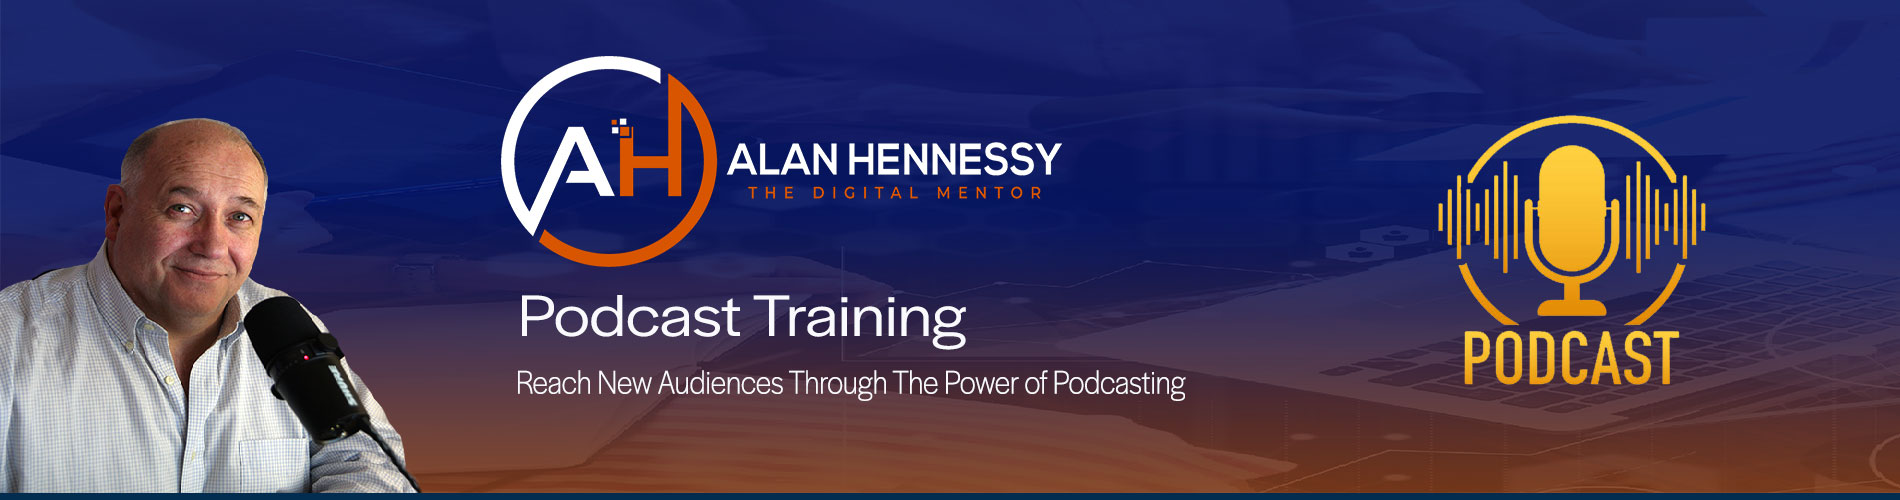 Podcast Training with Alan Hennessy - The Digital Mentor